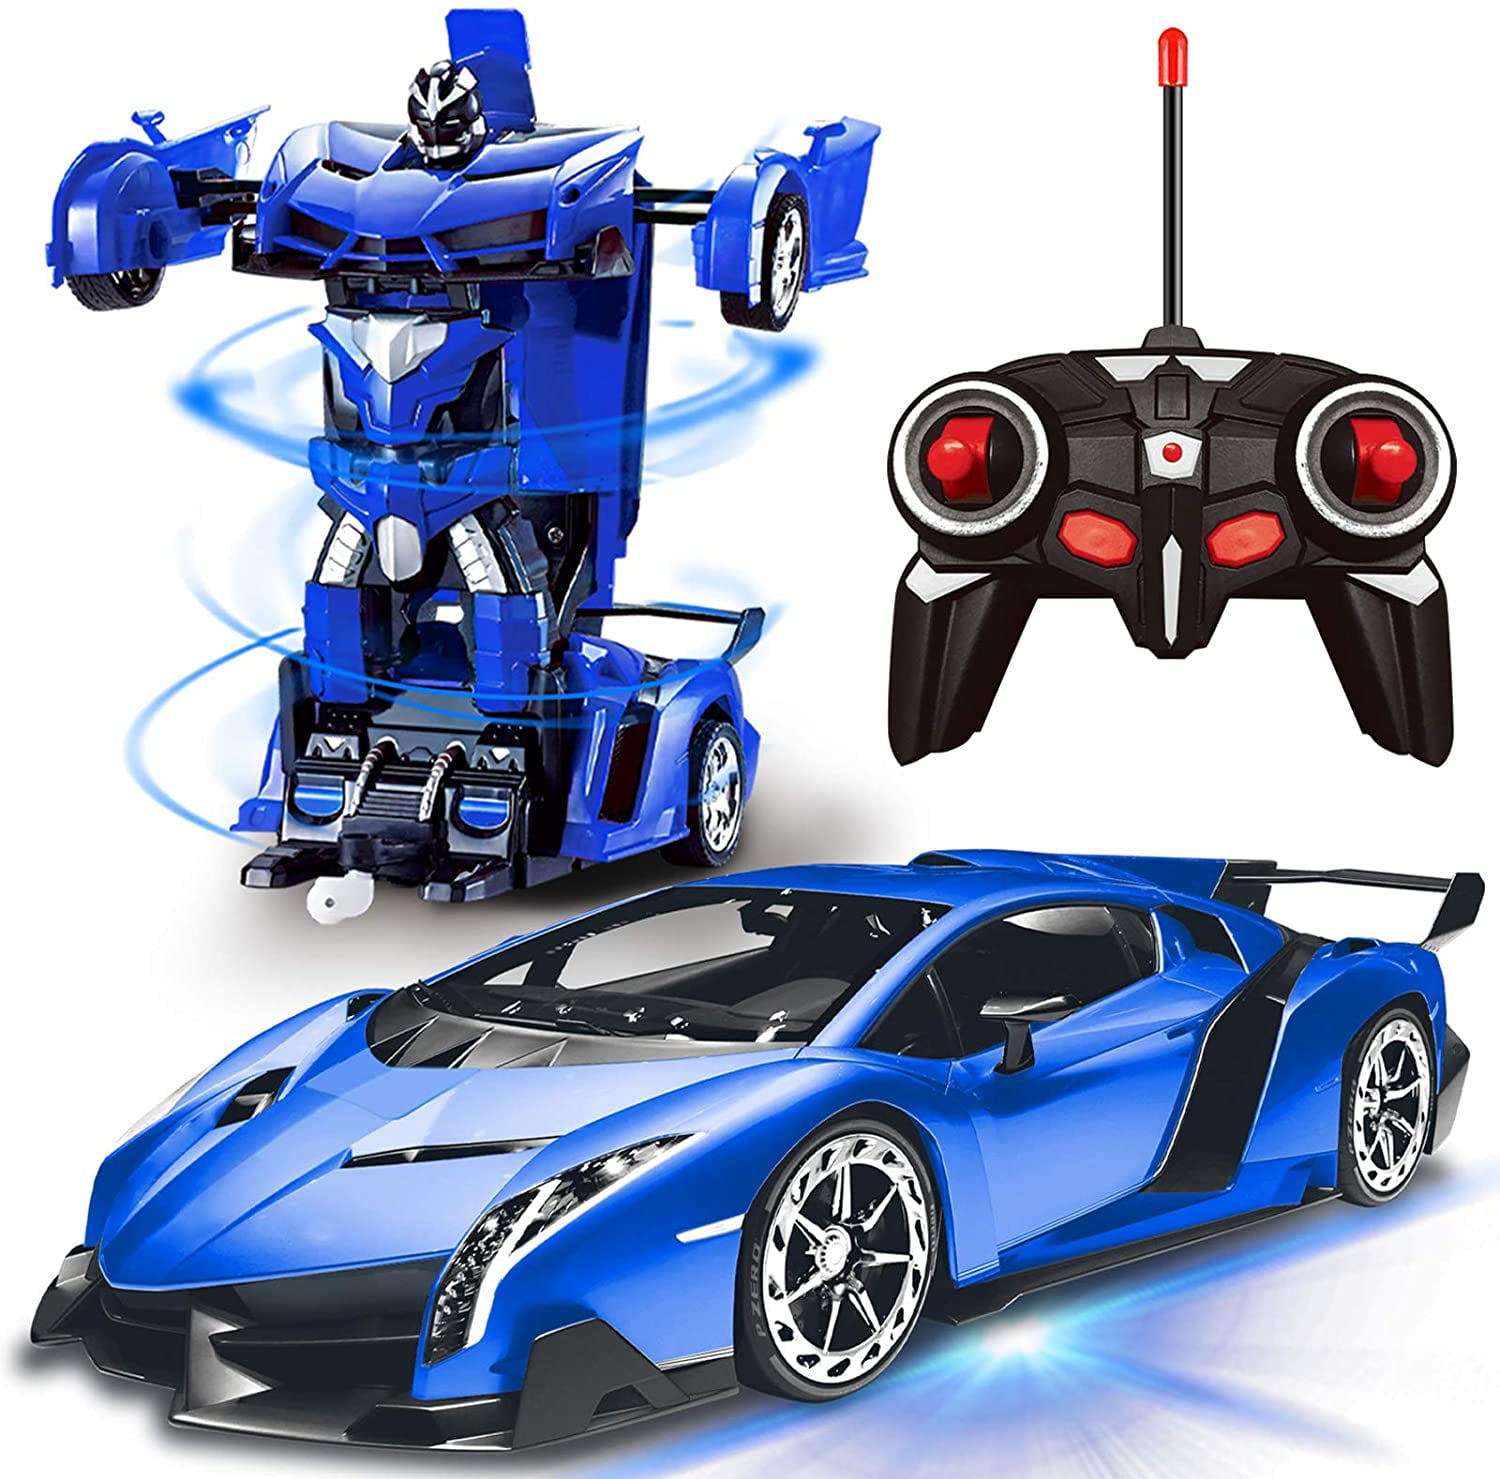 1:18 Transformer RC Sport Robot Car Remote Control 2in1 Kids Toy Model Xmas Gift 